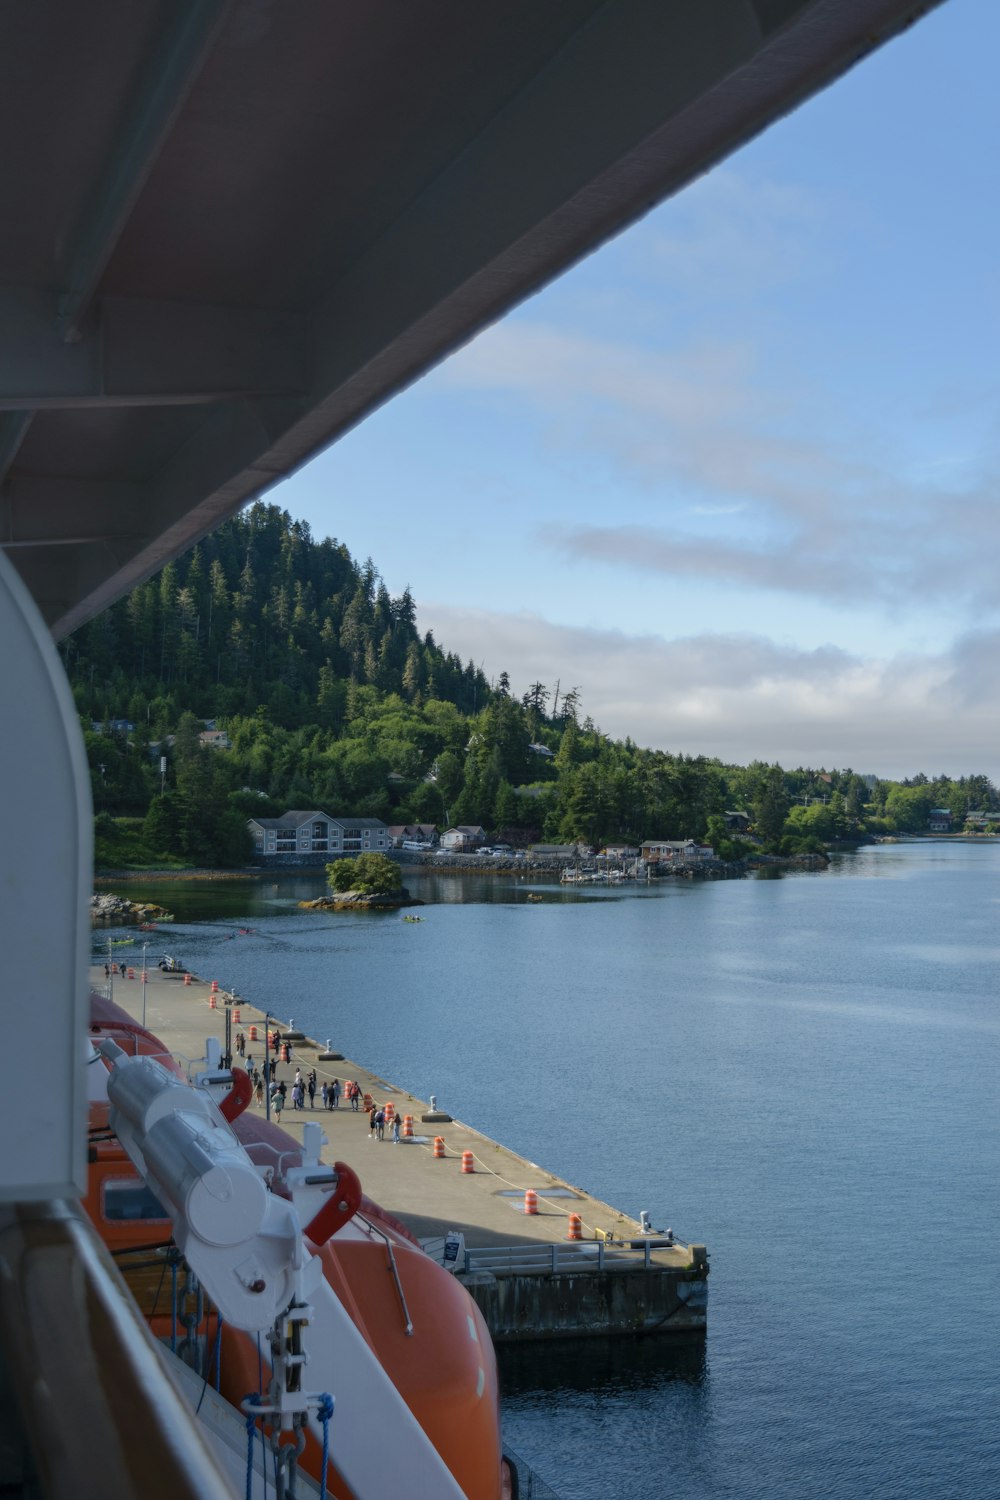 a view of a body of water from a cruise ship